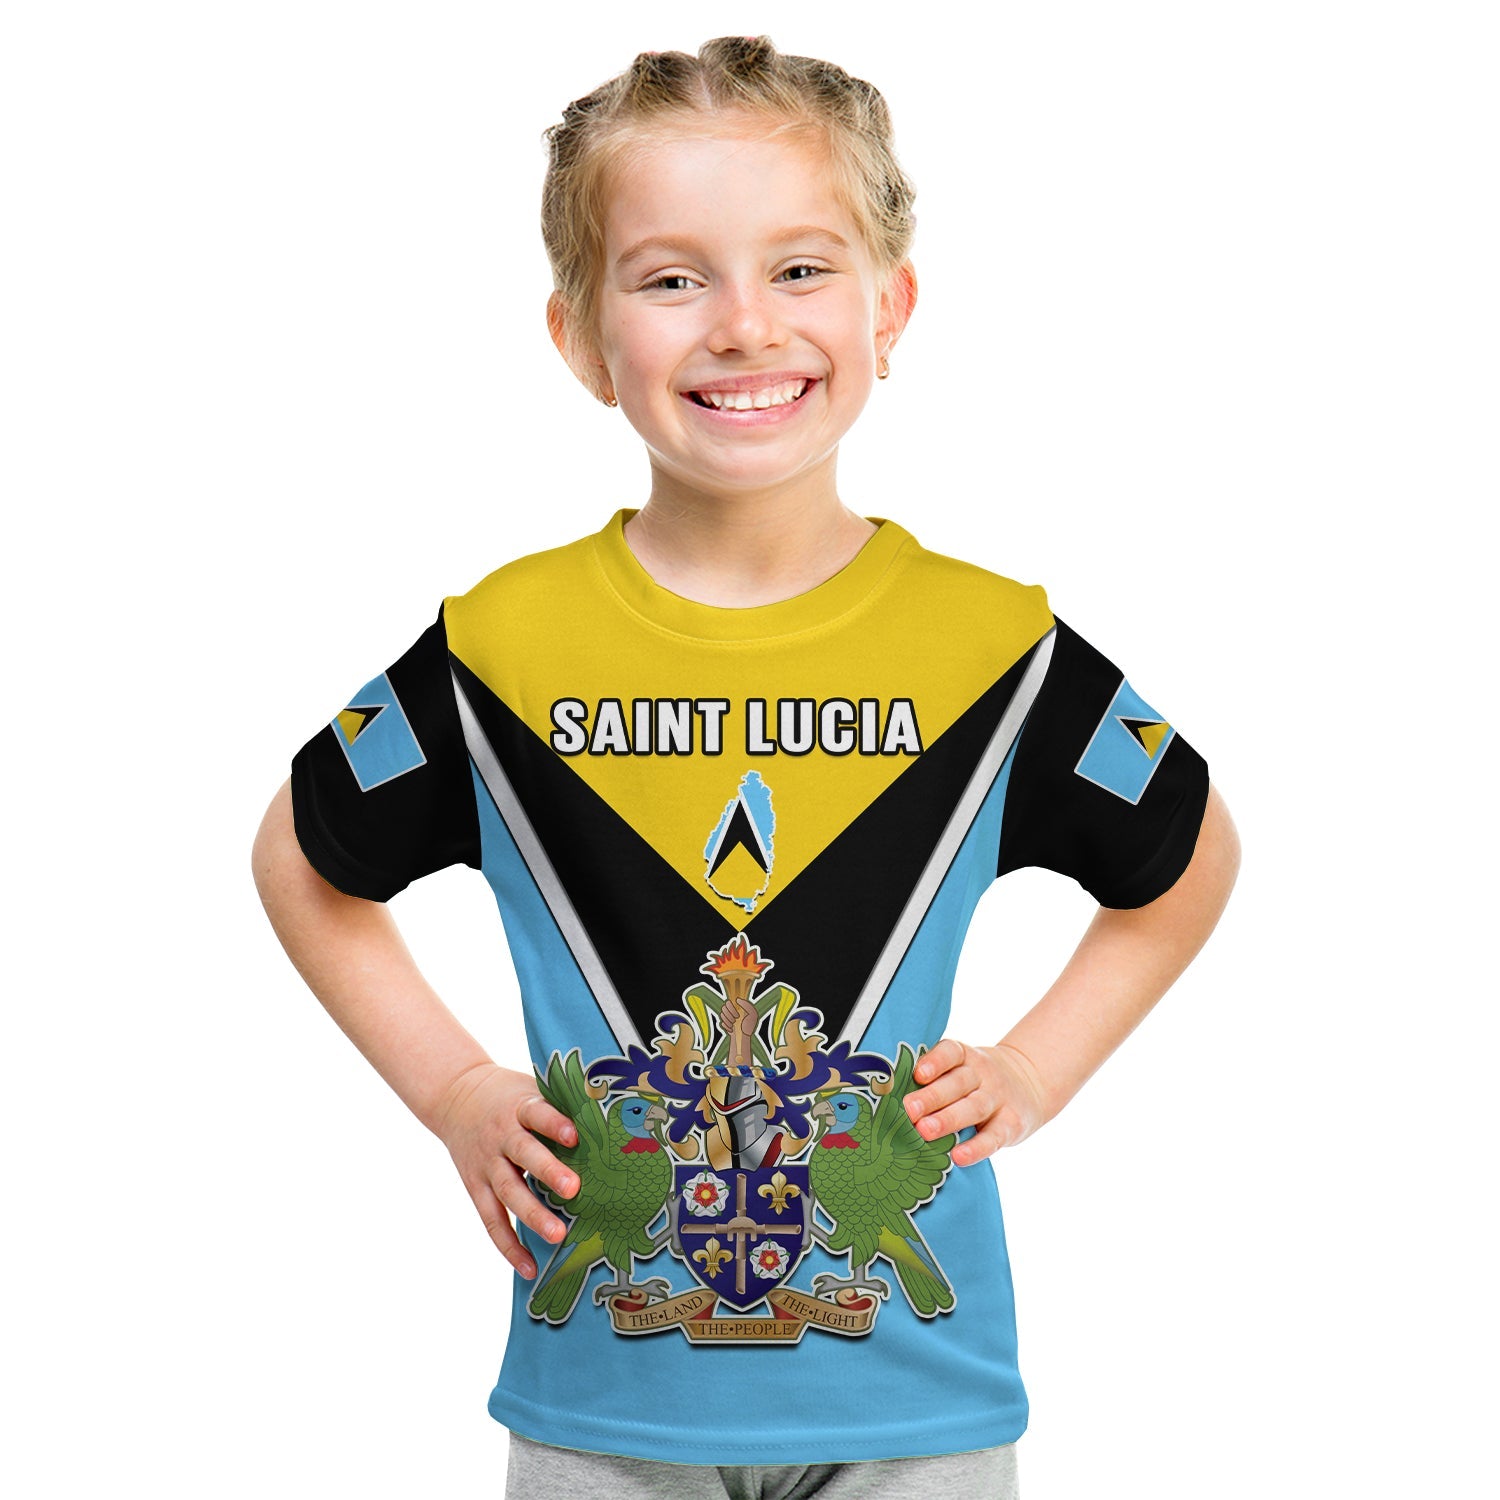 saint-lucia-t-shirt-kid-happy-44-years-of-independence